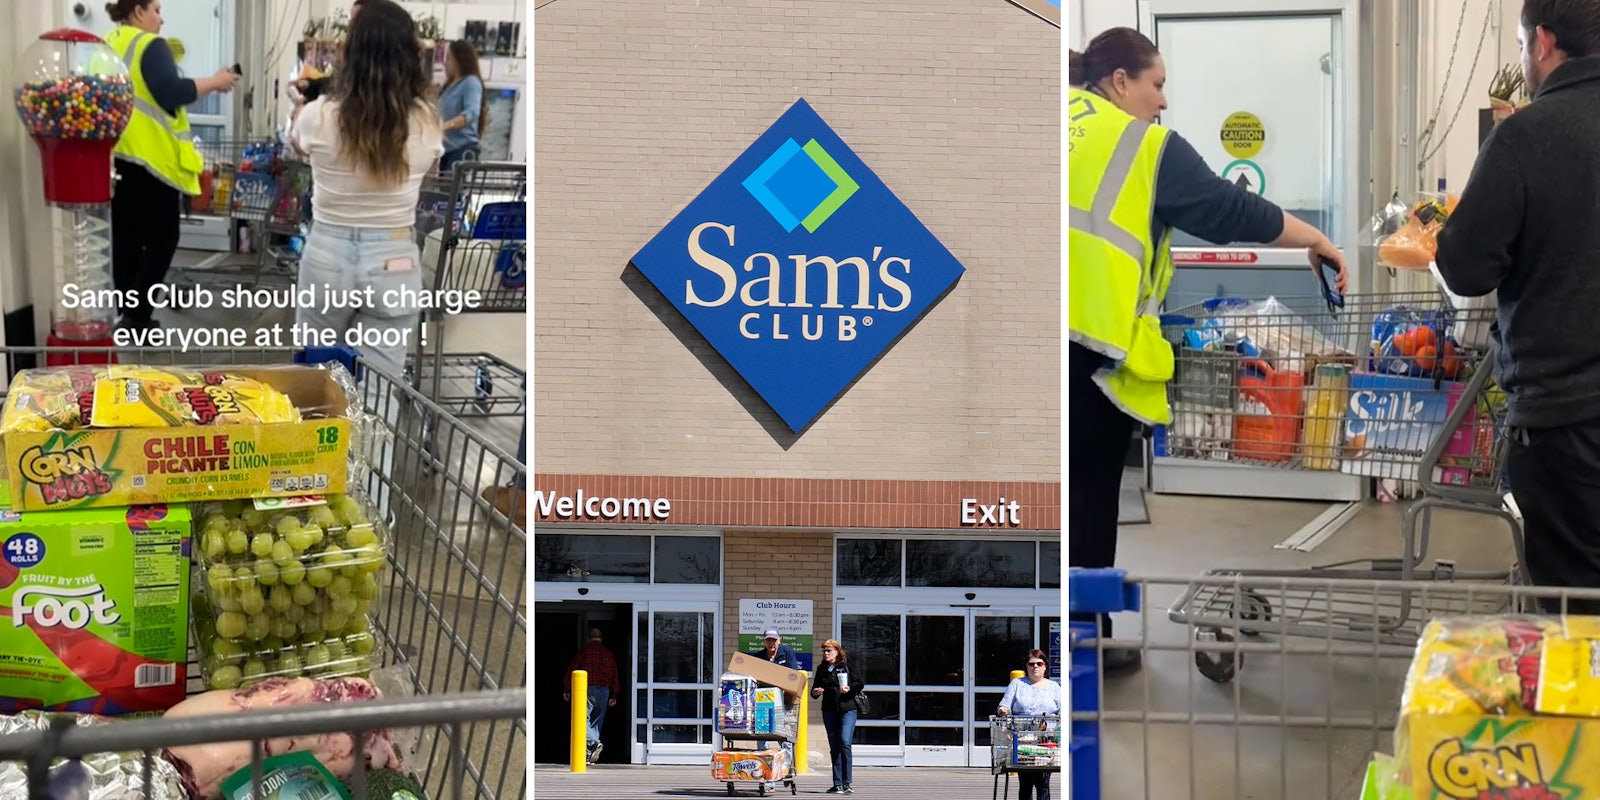 Shopper says Sam’s Club should start charging customers at exit after experiencing long line, wait to leave